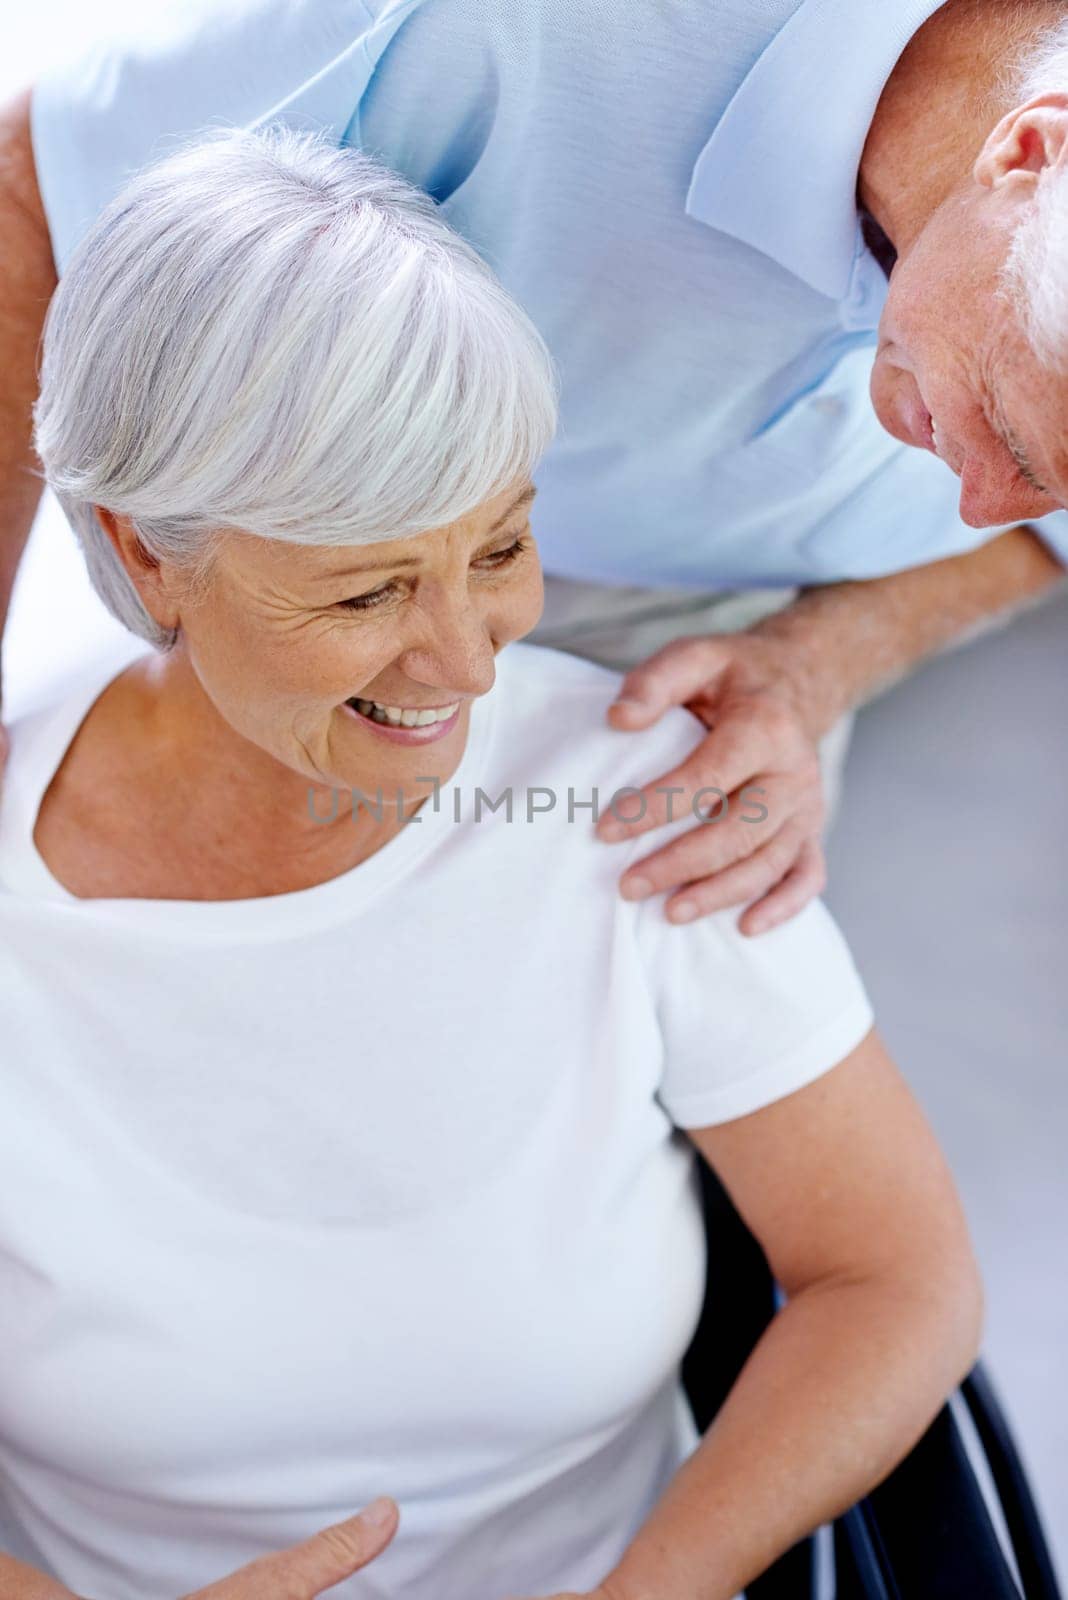 The long romance continues. Closeup shot of a happy senior couple in a hospital